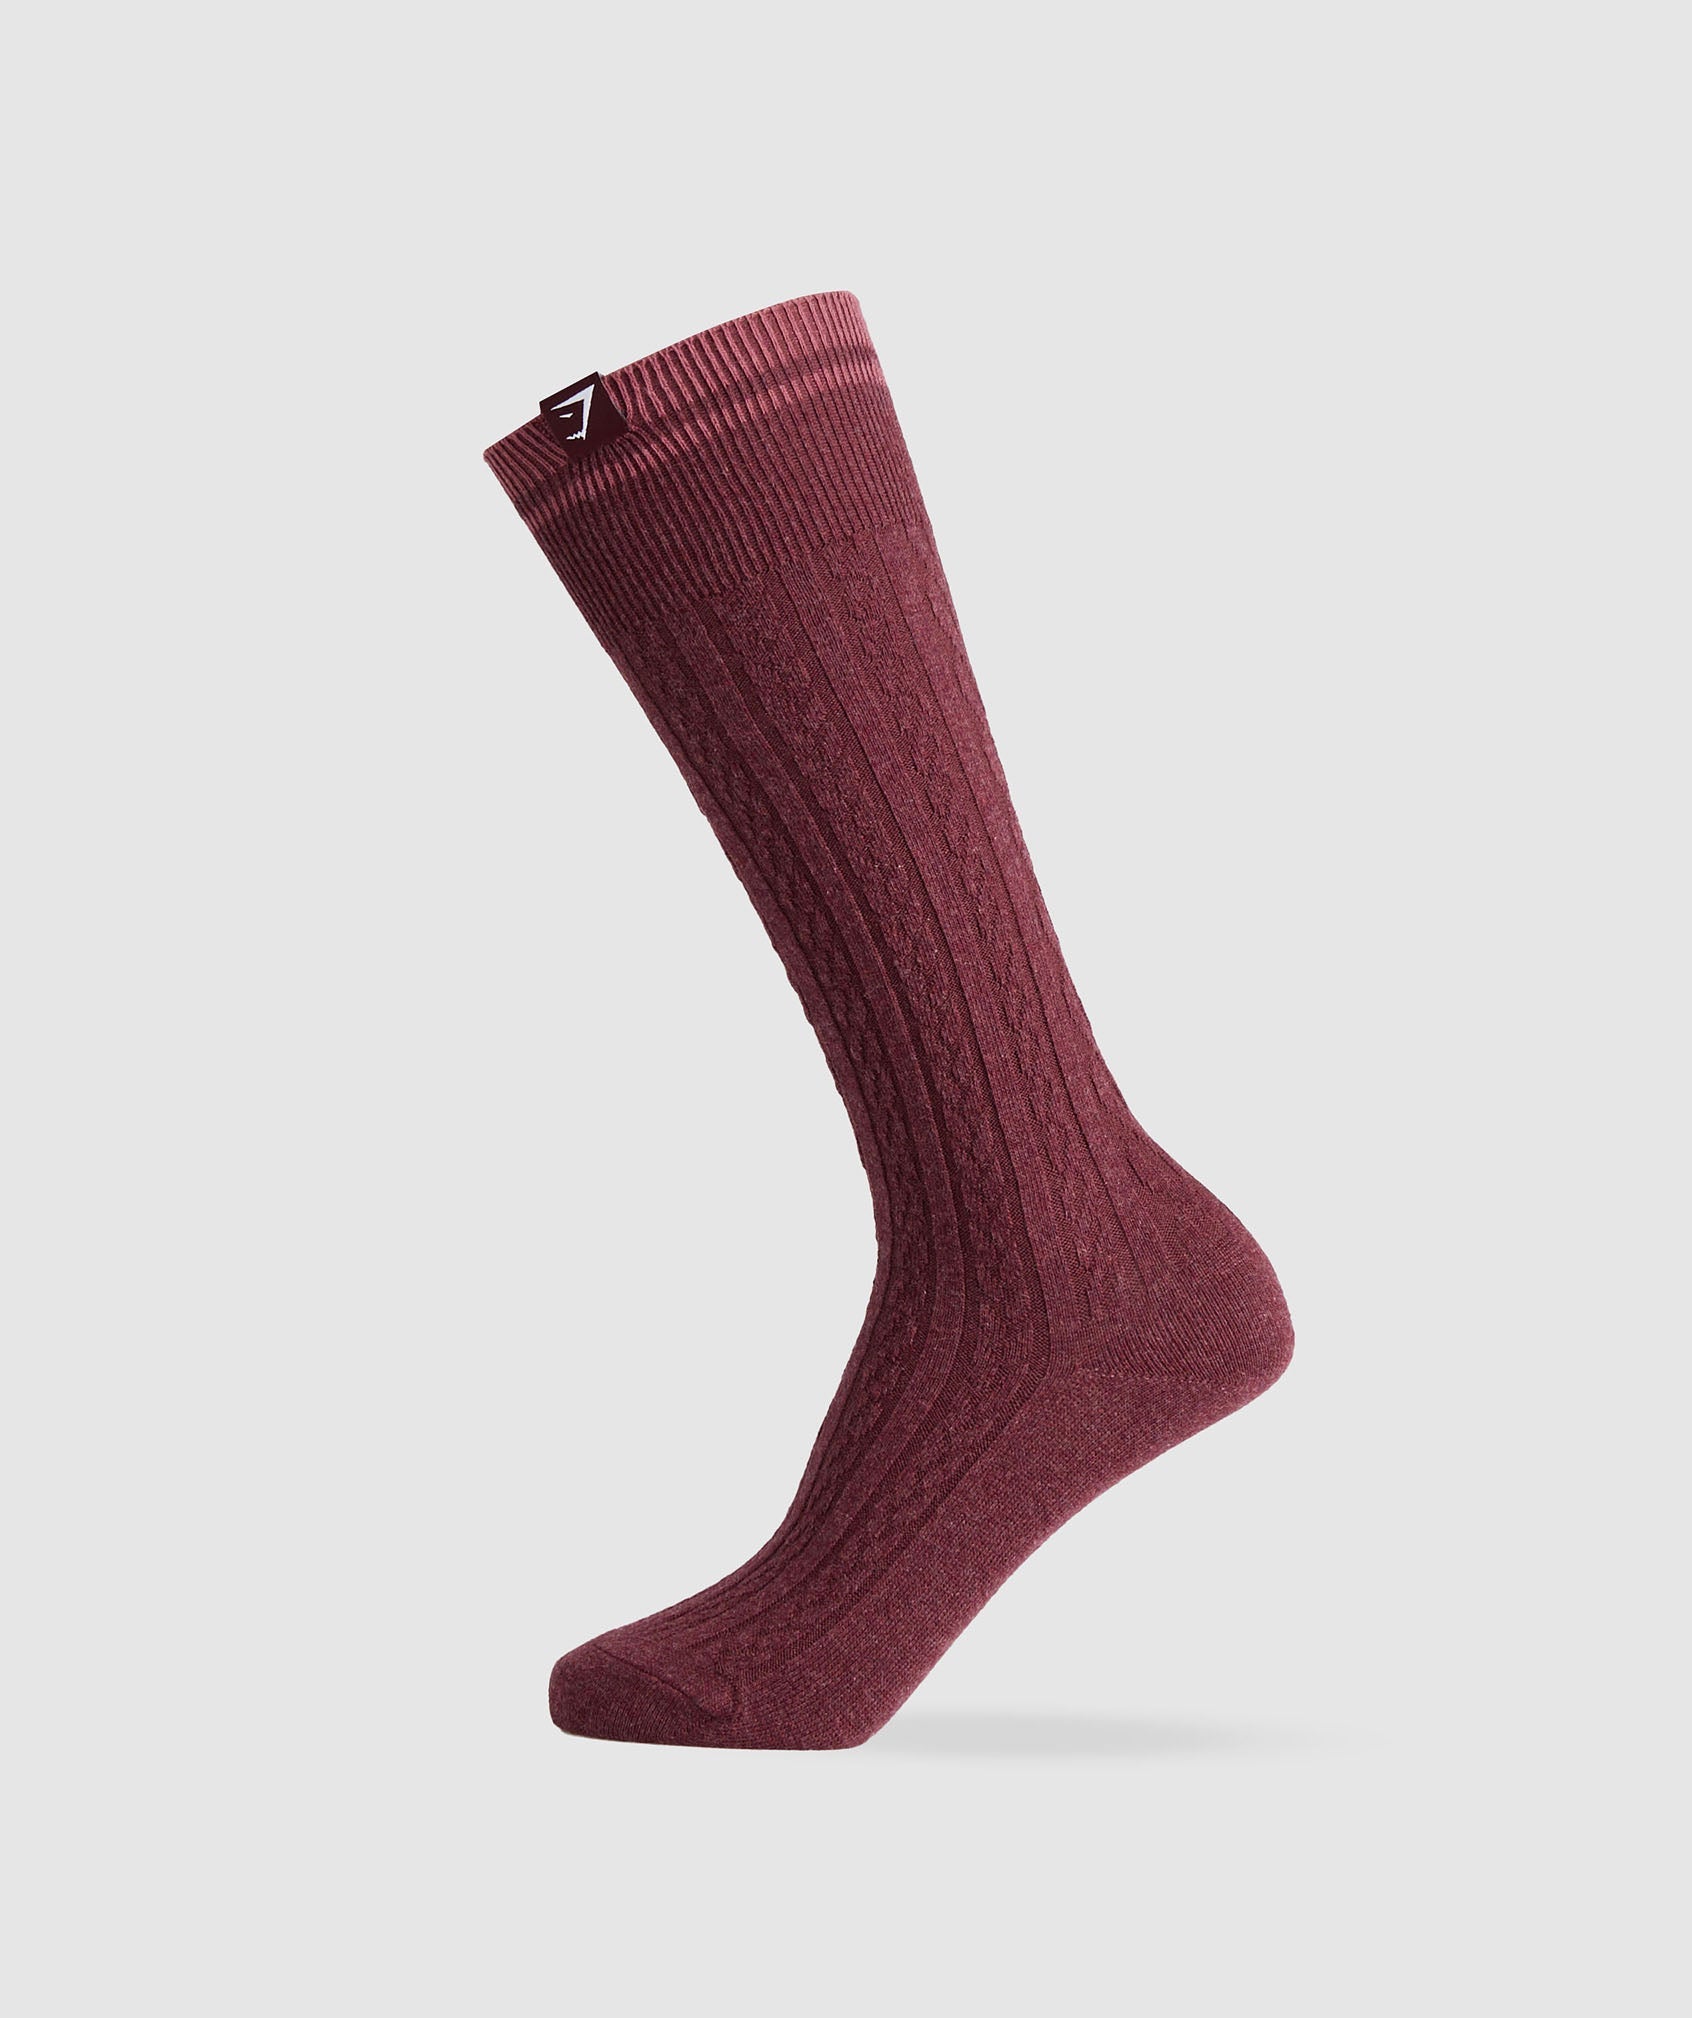 Rest Day Cable Socks in Rich Maroon Marl/Burgundy Brown/Soft Berry